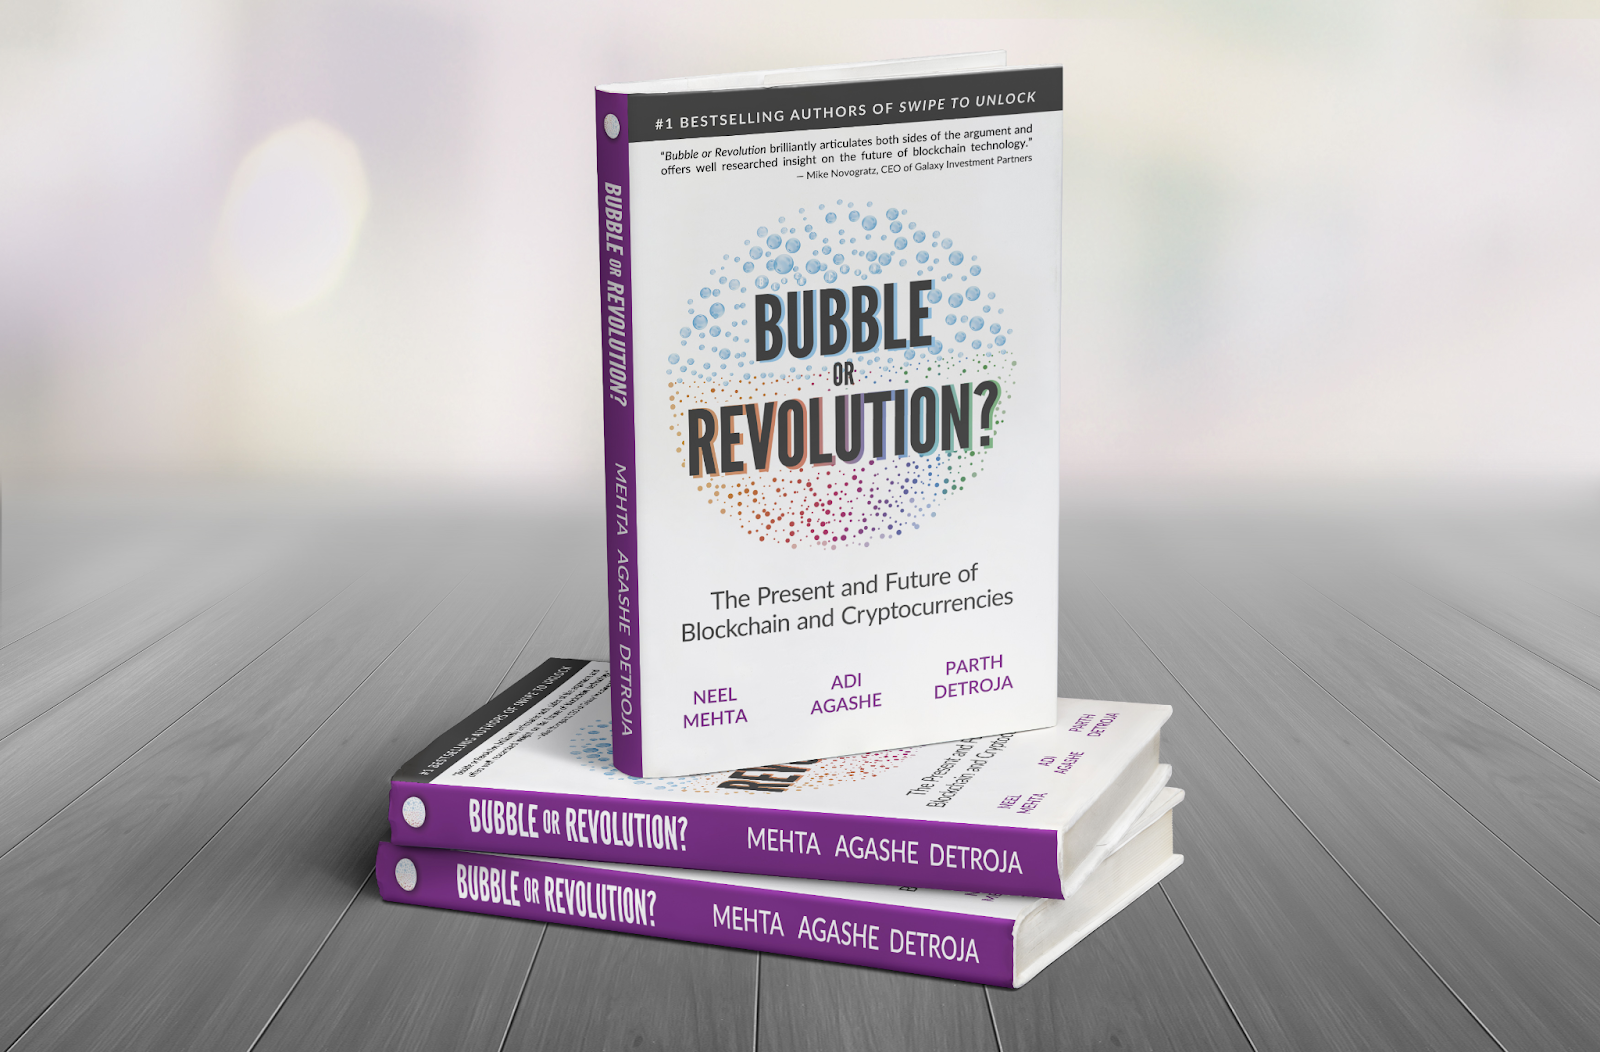 Among books for Web3, Bubble or Revolution is a must-read!